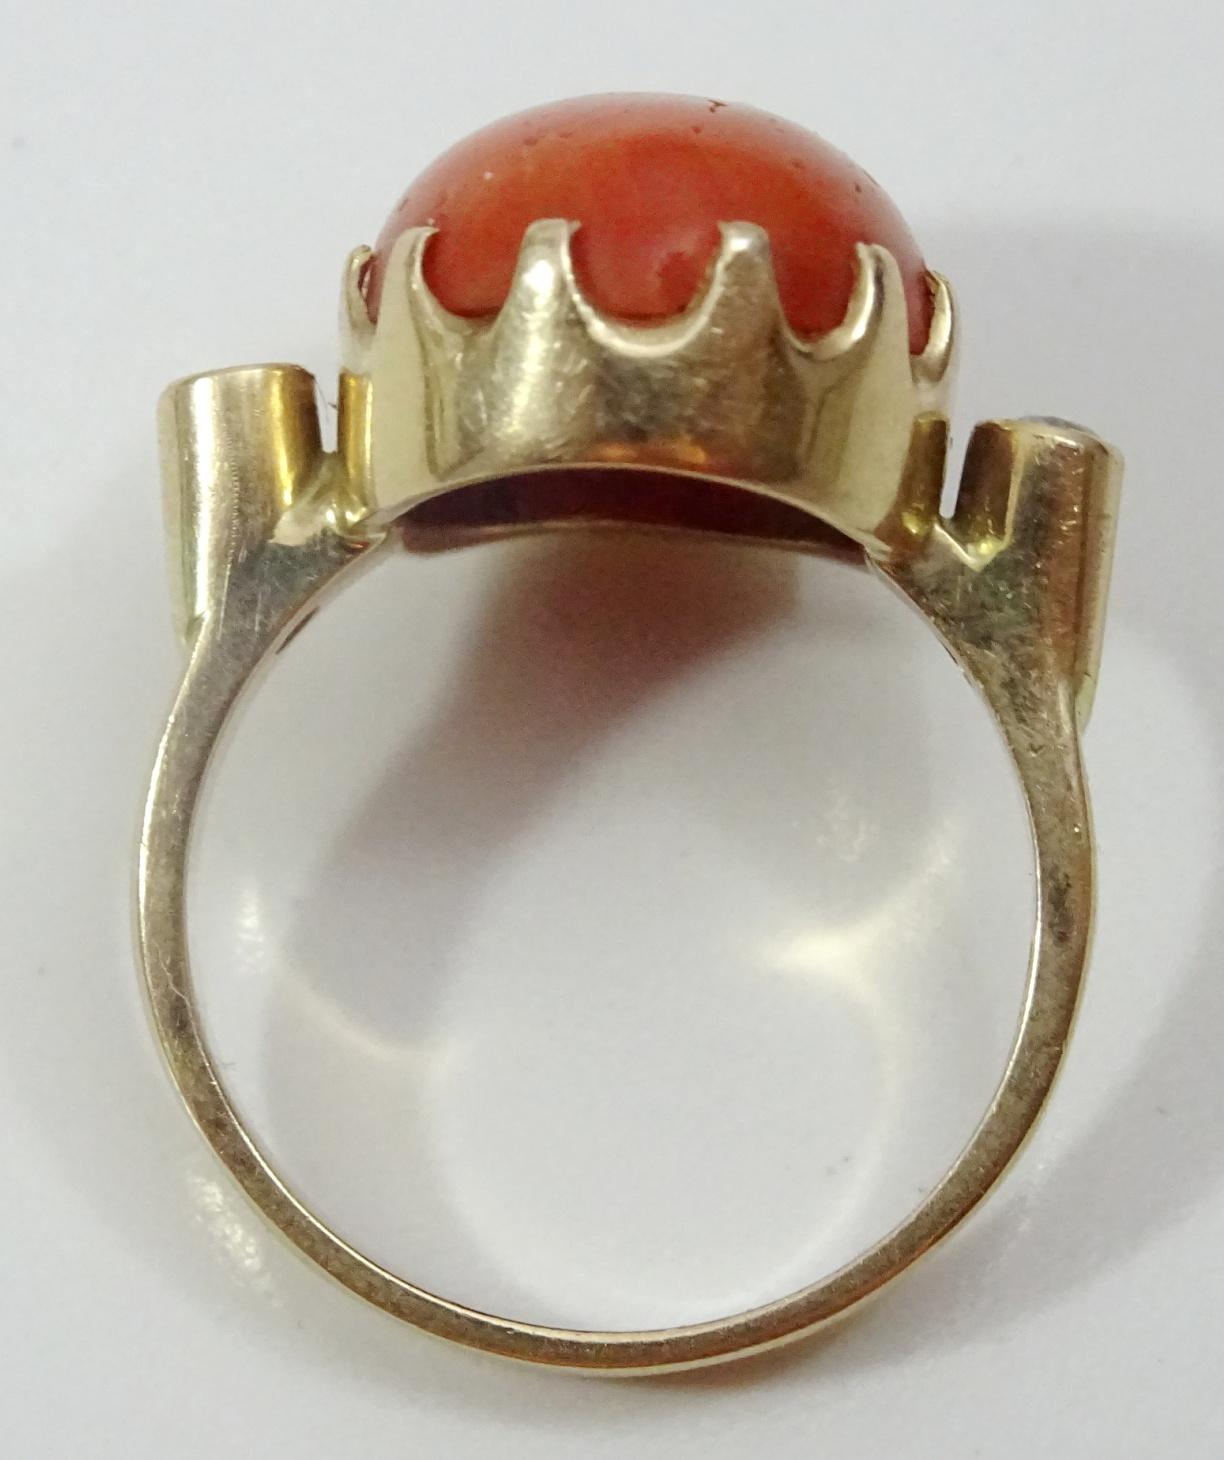 We have for sale a vintage 14 karat gold ring  ( clearly hallmarked )
 The Ring is set with a  striking somewhat between Solomon and Ox Blood red Italian oval Coral measuring 12.5 x 16 mm,. 
Framing the Coral on each side in high cup settings are